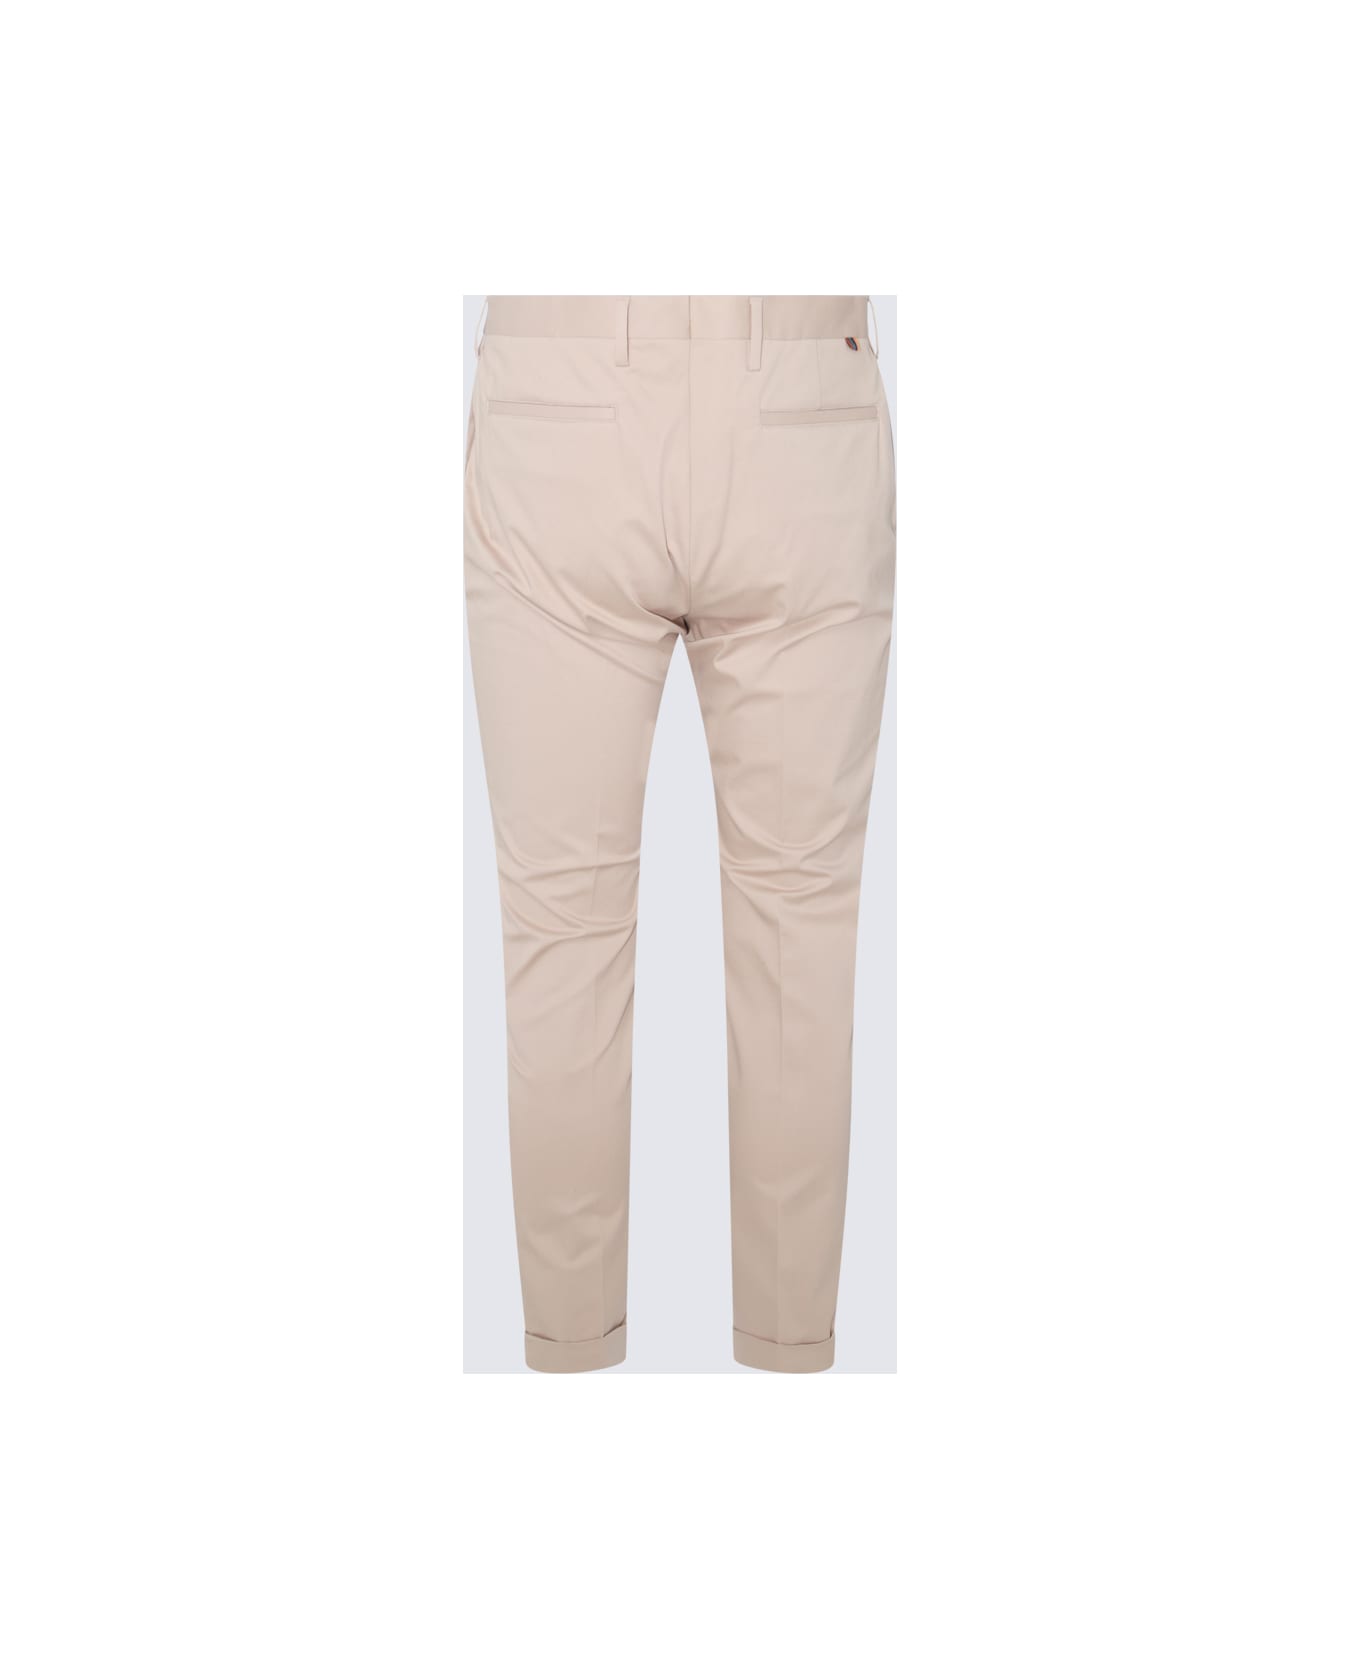 Paul Smith Beige Cotton Blend Trousers - SAND ボトムス